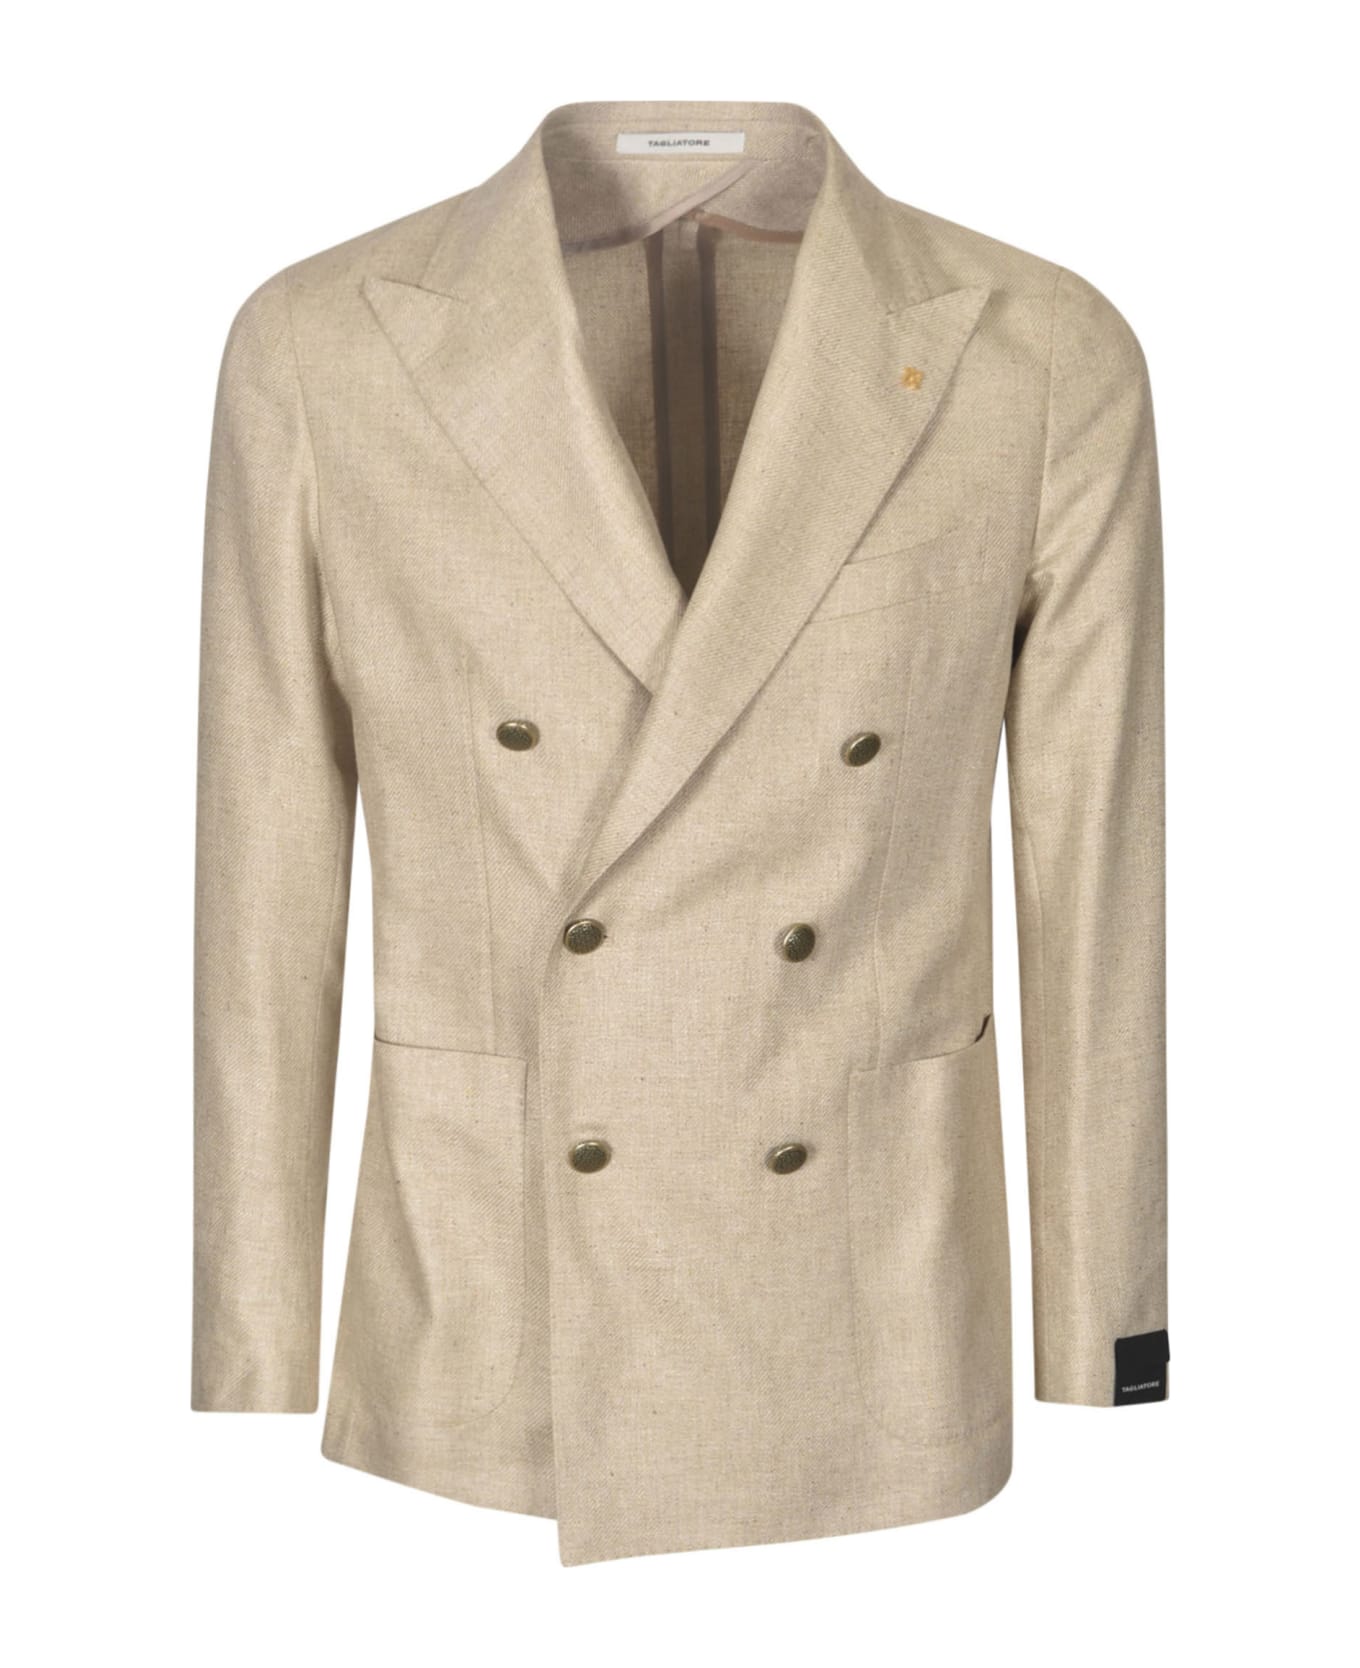 Tagliatore Logo Patched Dinner Jacket - Beige ブレザー